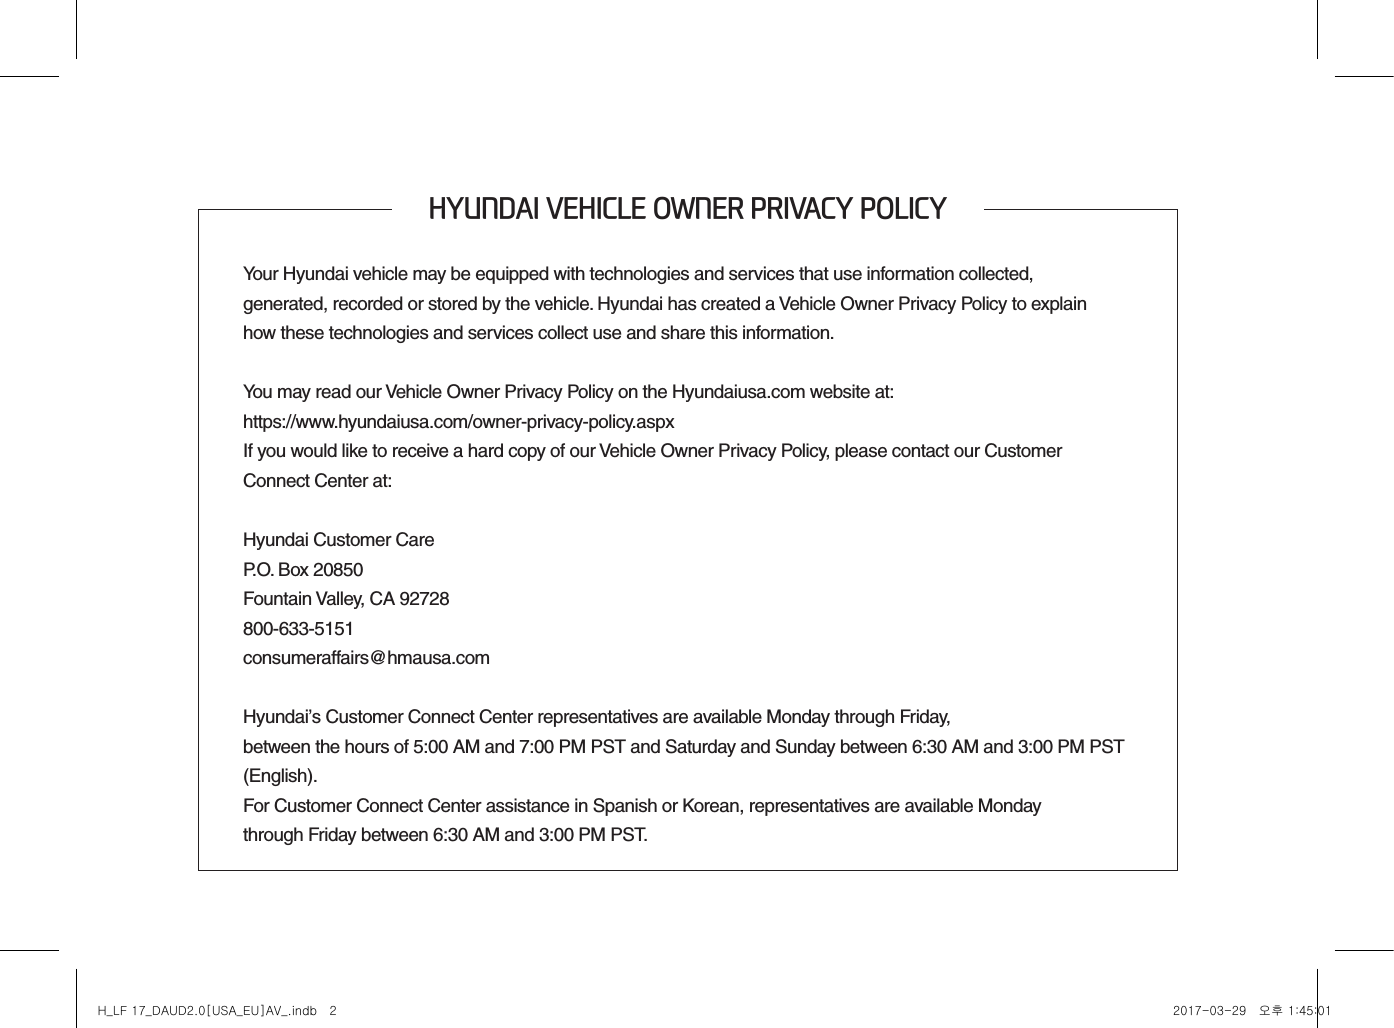 HYUNDAI VEHICLE OWNER PRIVACY POLICYYour Hyundai vehicle may be equipped with technologies and services that use information collected,  generated, recorded or stored by the vehicle. Hyundai has created a Vehicle Owner Privacy Policy to explain  how these technologies and services collect use and share this information.You may read our Vehicle Owner Privacy Policy on the Hyundaiusa.com website at:https://www.hyundaiusa.com/owner-privacy-policy.aspxIf you would like to receive a hard copy of our Vehicle Owner Privacy Policy, please contact our Customer  Connect Center at:Hyundai Customer CareP.O. Box 20850Fountain Valley, CA 92728800-633-5151consumeraffairs@hmausa.comHyundai’s Customer Connect Center representatives are available Monday through Friday,  between the hours of 5:00 AM and 7:00 PM PST and Saturday and Sunday between 6:30 AM and 3:00 PM PST (English).For Customer Connect Center assistance in Spanish or Korean, representatives are available Monday  through Friday between 6:30 AM and 3:00 PM PST.H_LF 17_DAUD2.0[USA_EU]AV_.indb   2 2017-03-29   오후 1:45:01